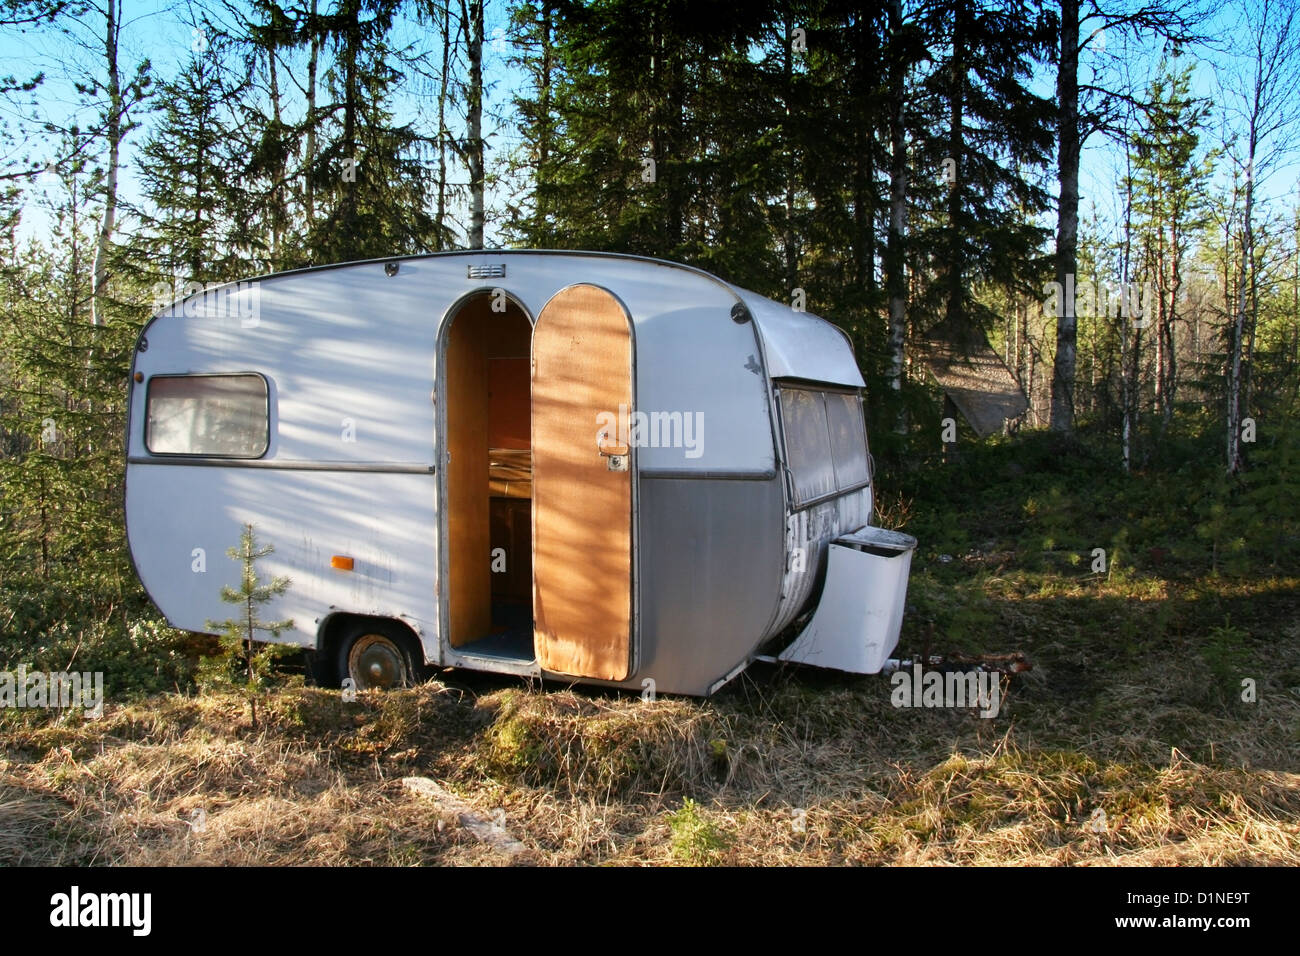 Vintage caravan in the forest Stock Photo